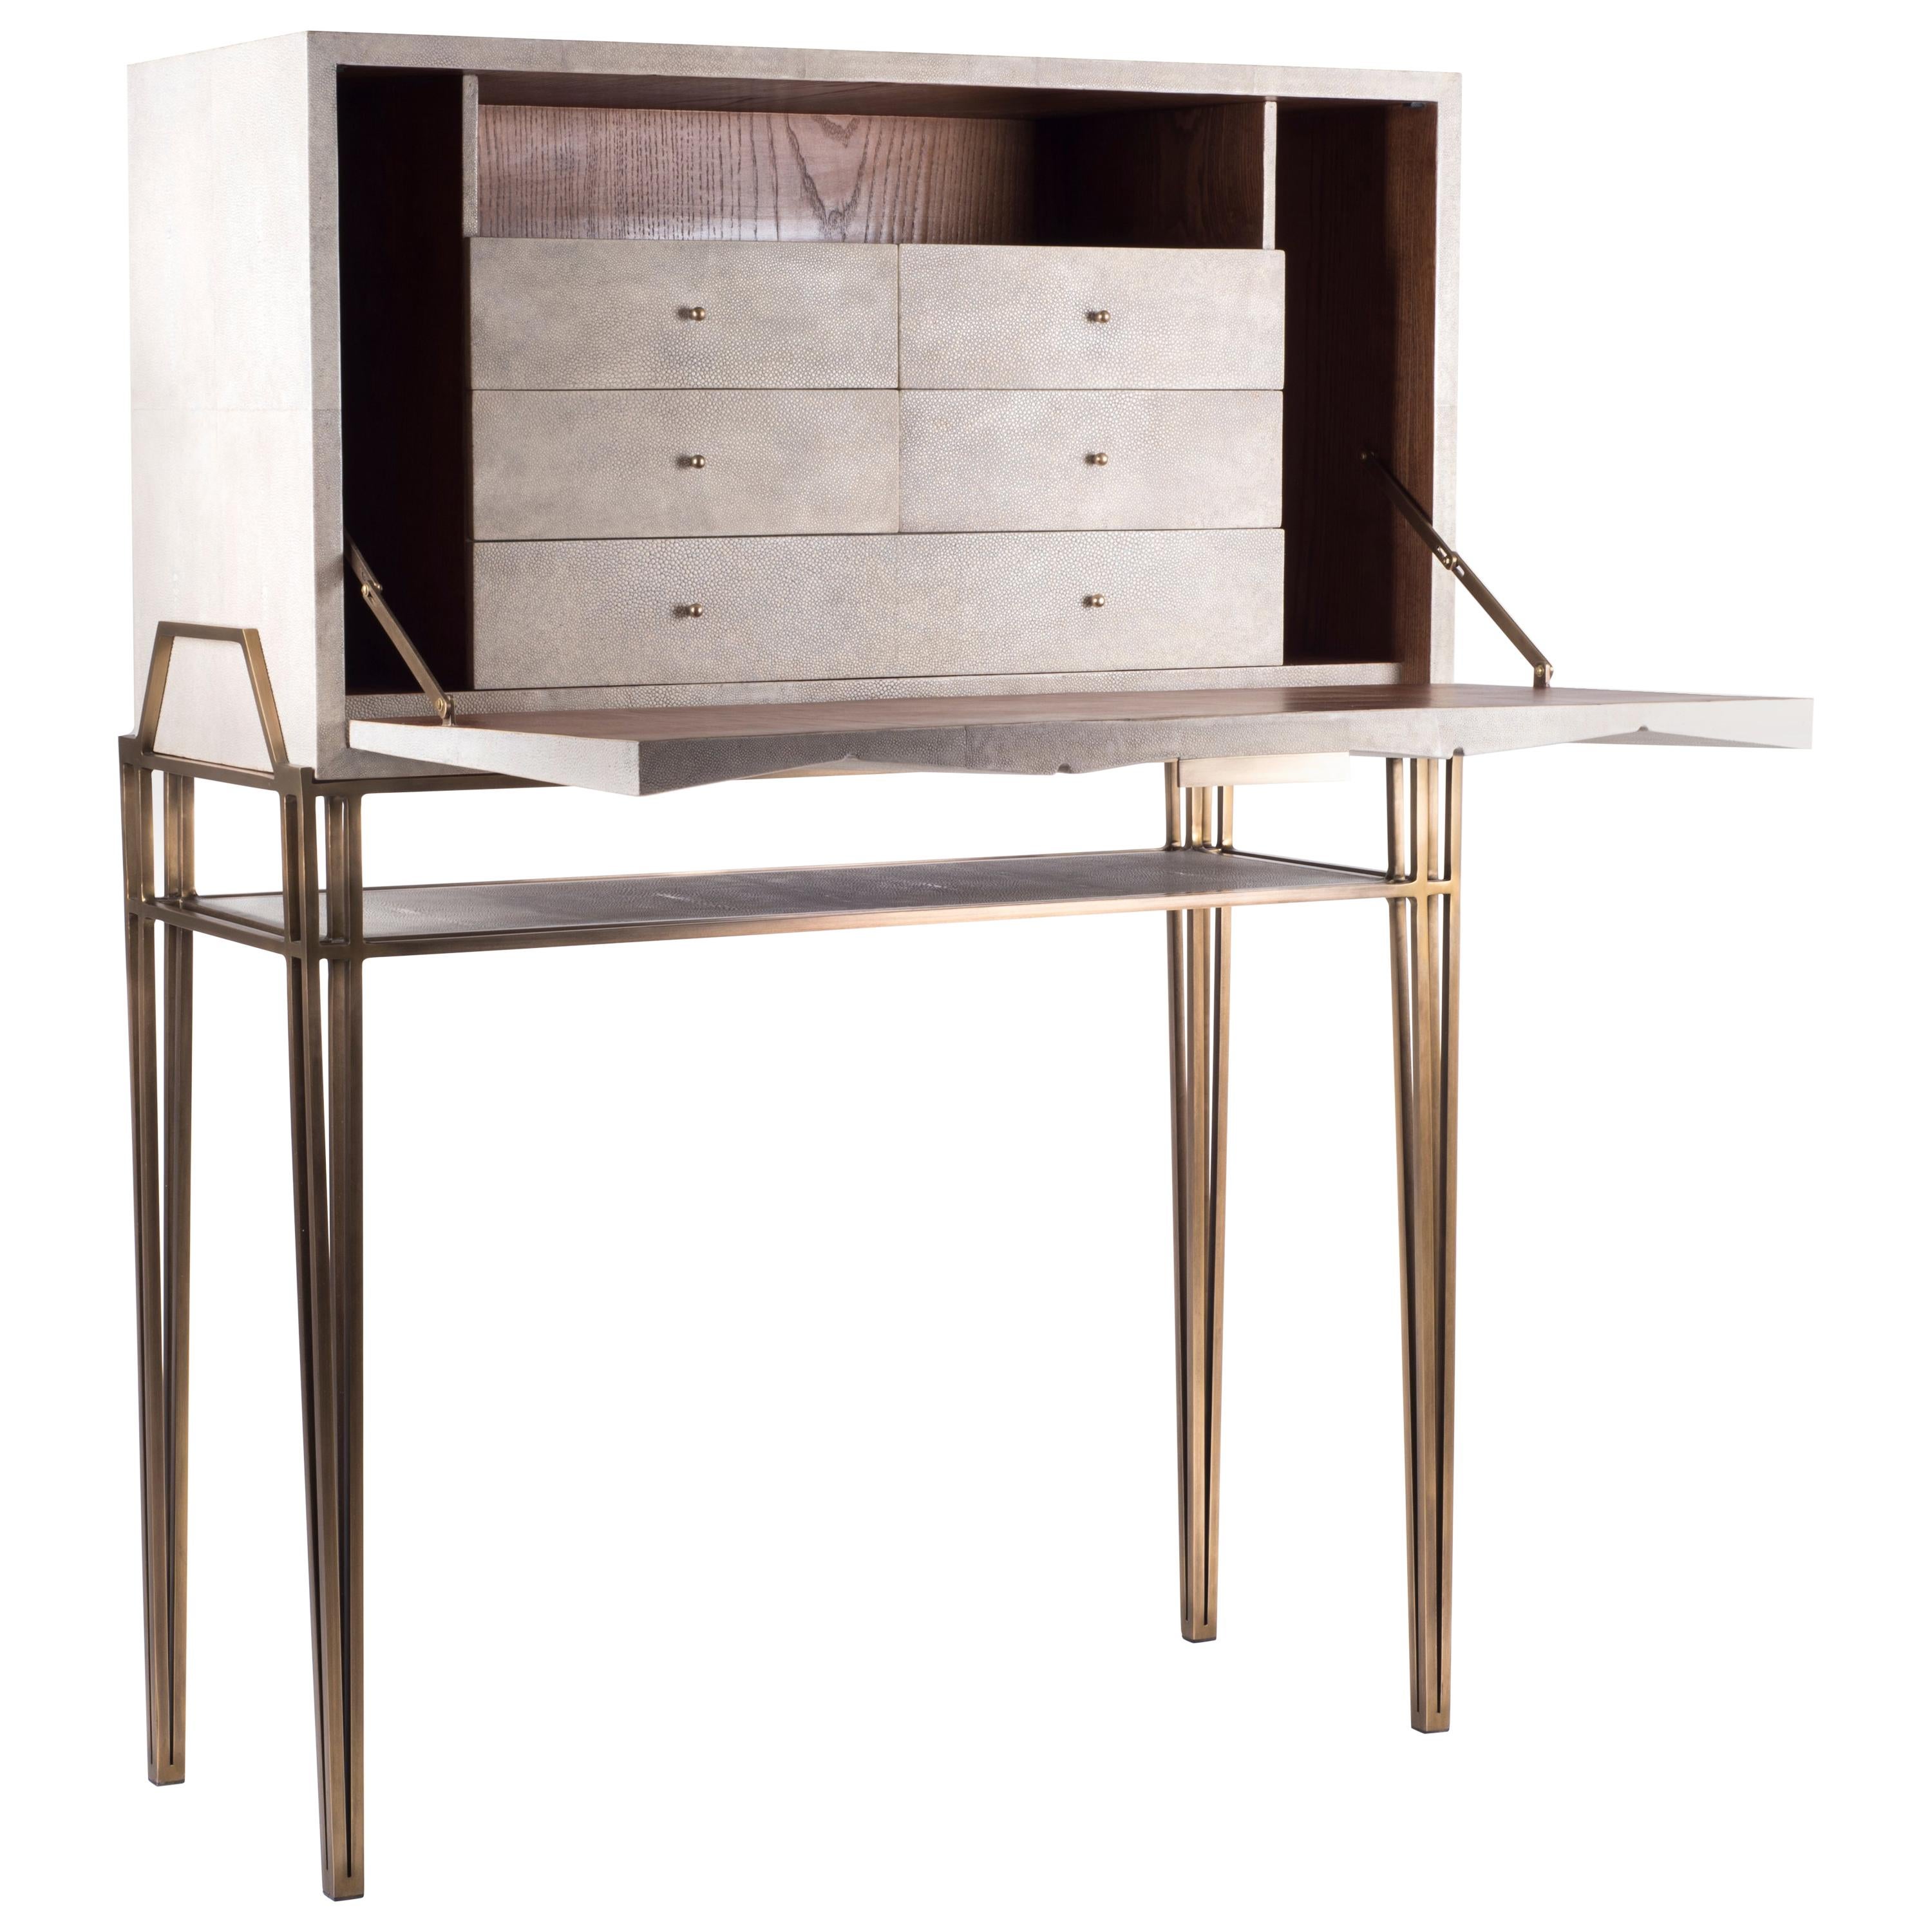 The secrétaire desk is the perfect functional working unit. The flap top opens up into a desk with several compartments, inlaid in shagreen and wood veneer, to store items and once closed offers a beautiful piece to look at. The top removable piece